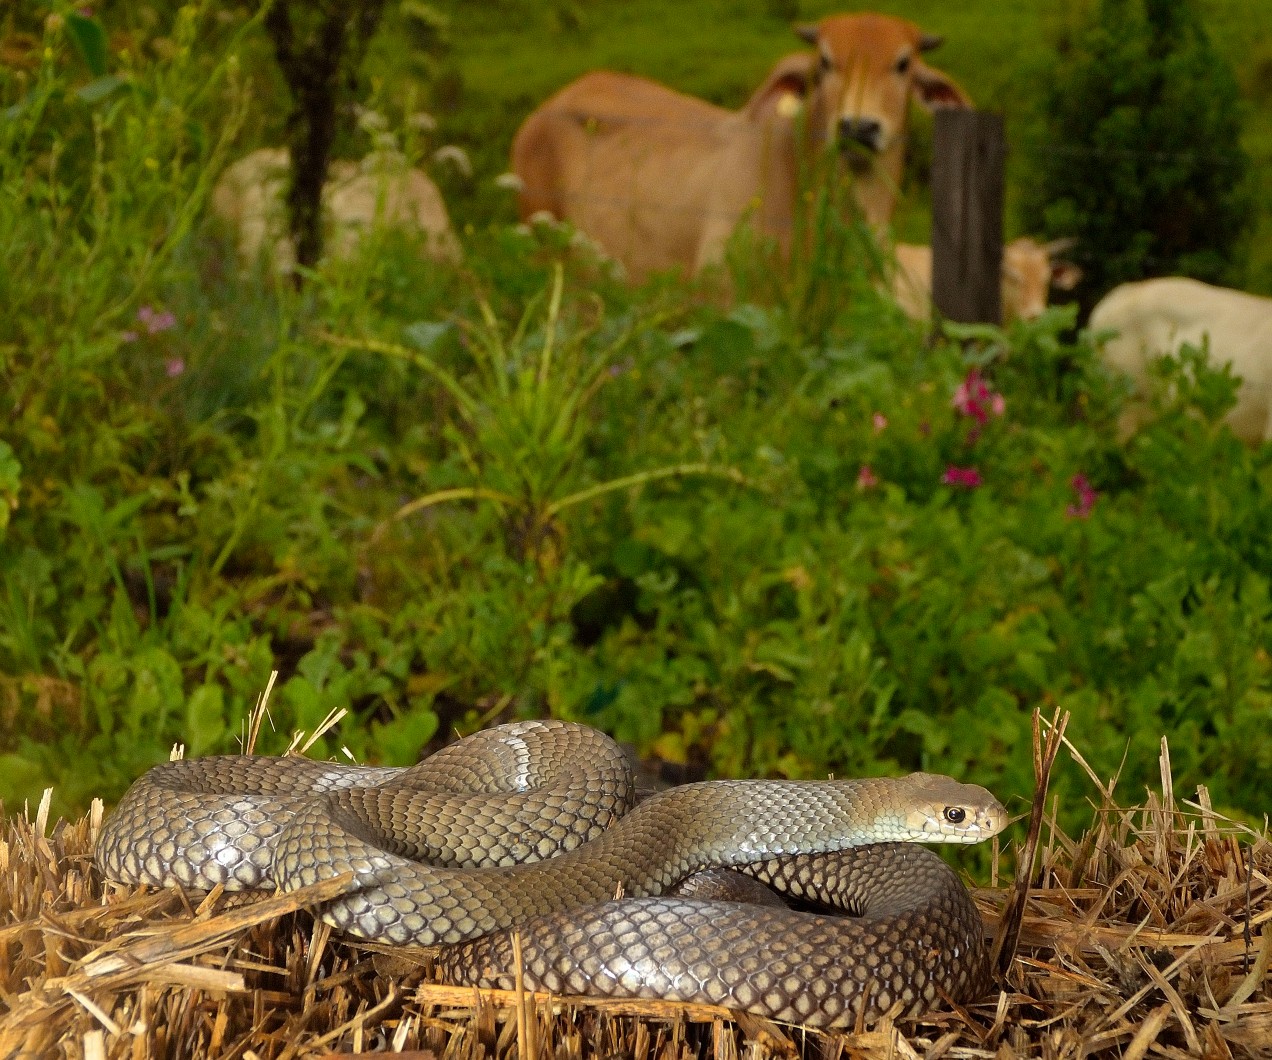 Eastern brown snake in a field with a cow in the background